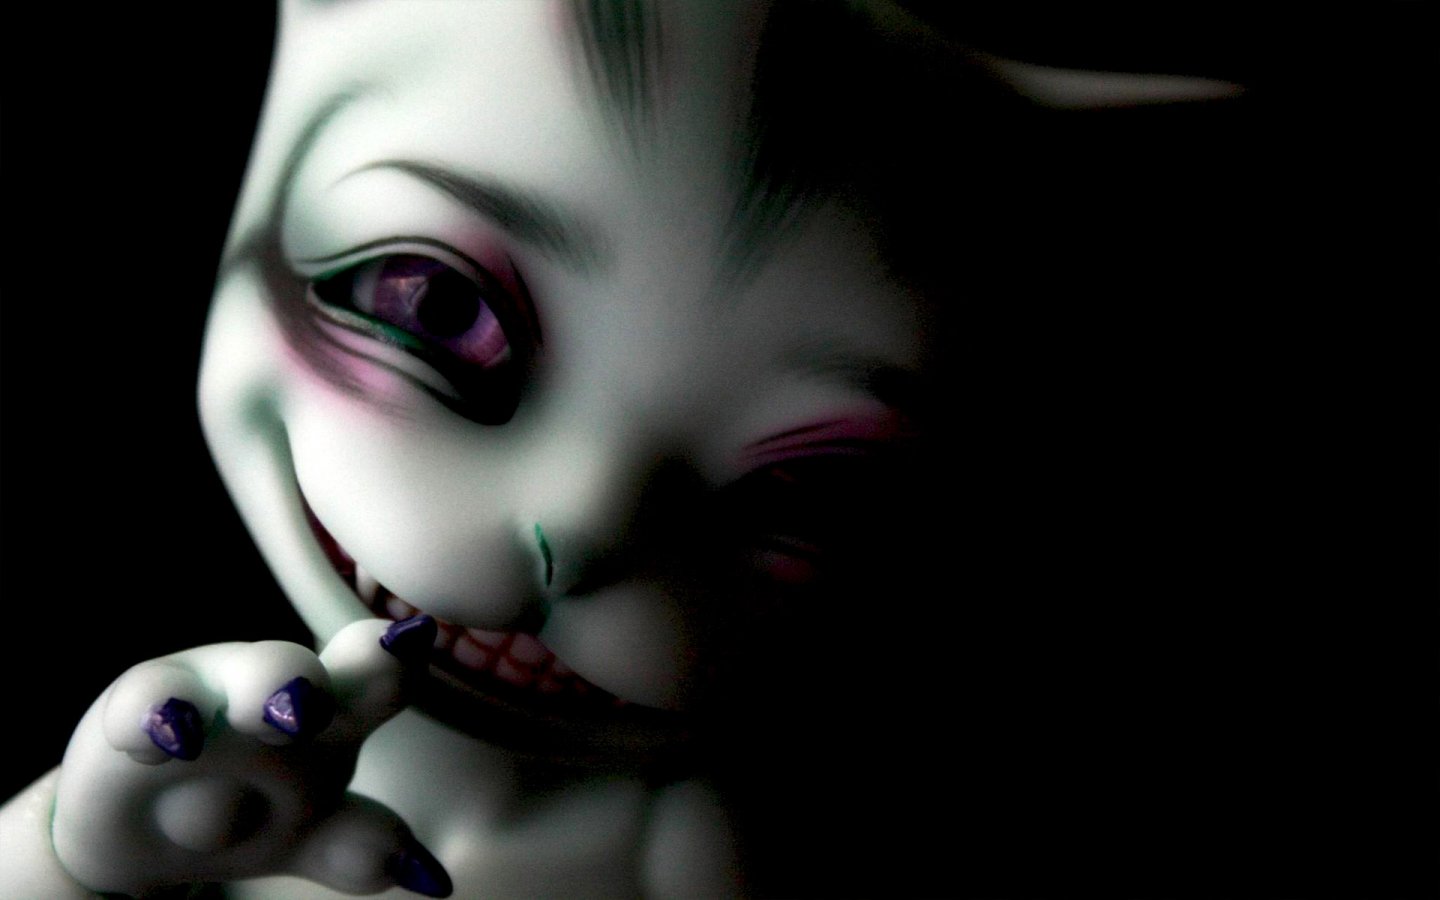 Creepy Stories for Creepy Kids   HD Wallpapers Widescreen   1440x900 1440x900